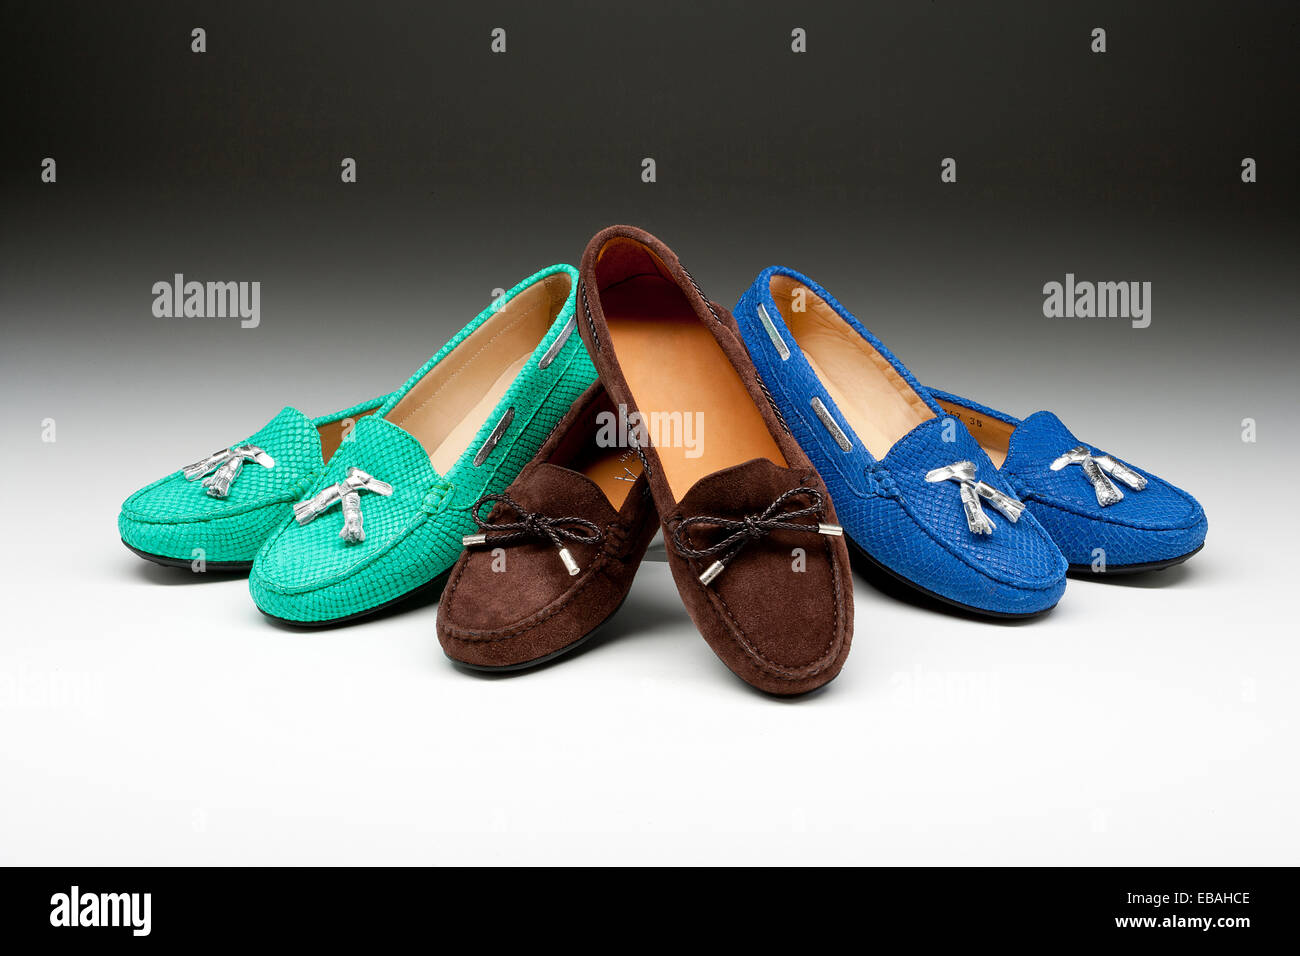 Three pairs of womens loafer shoes on a graduated background. Stock Photo